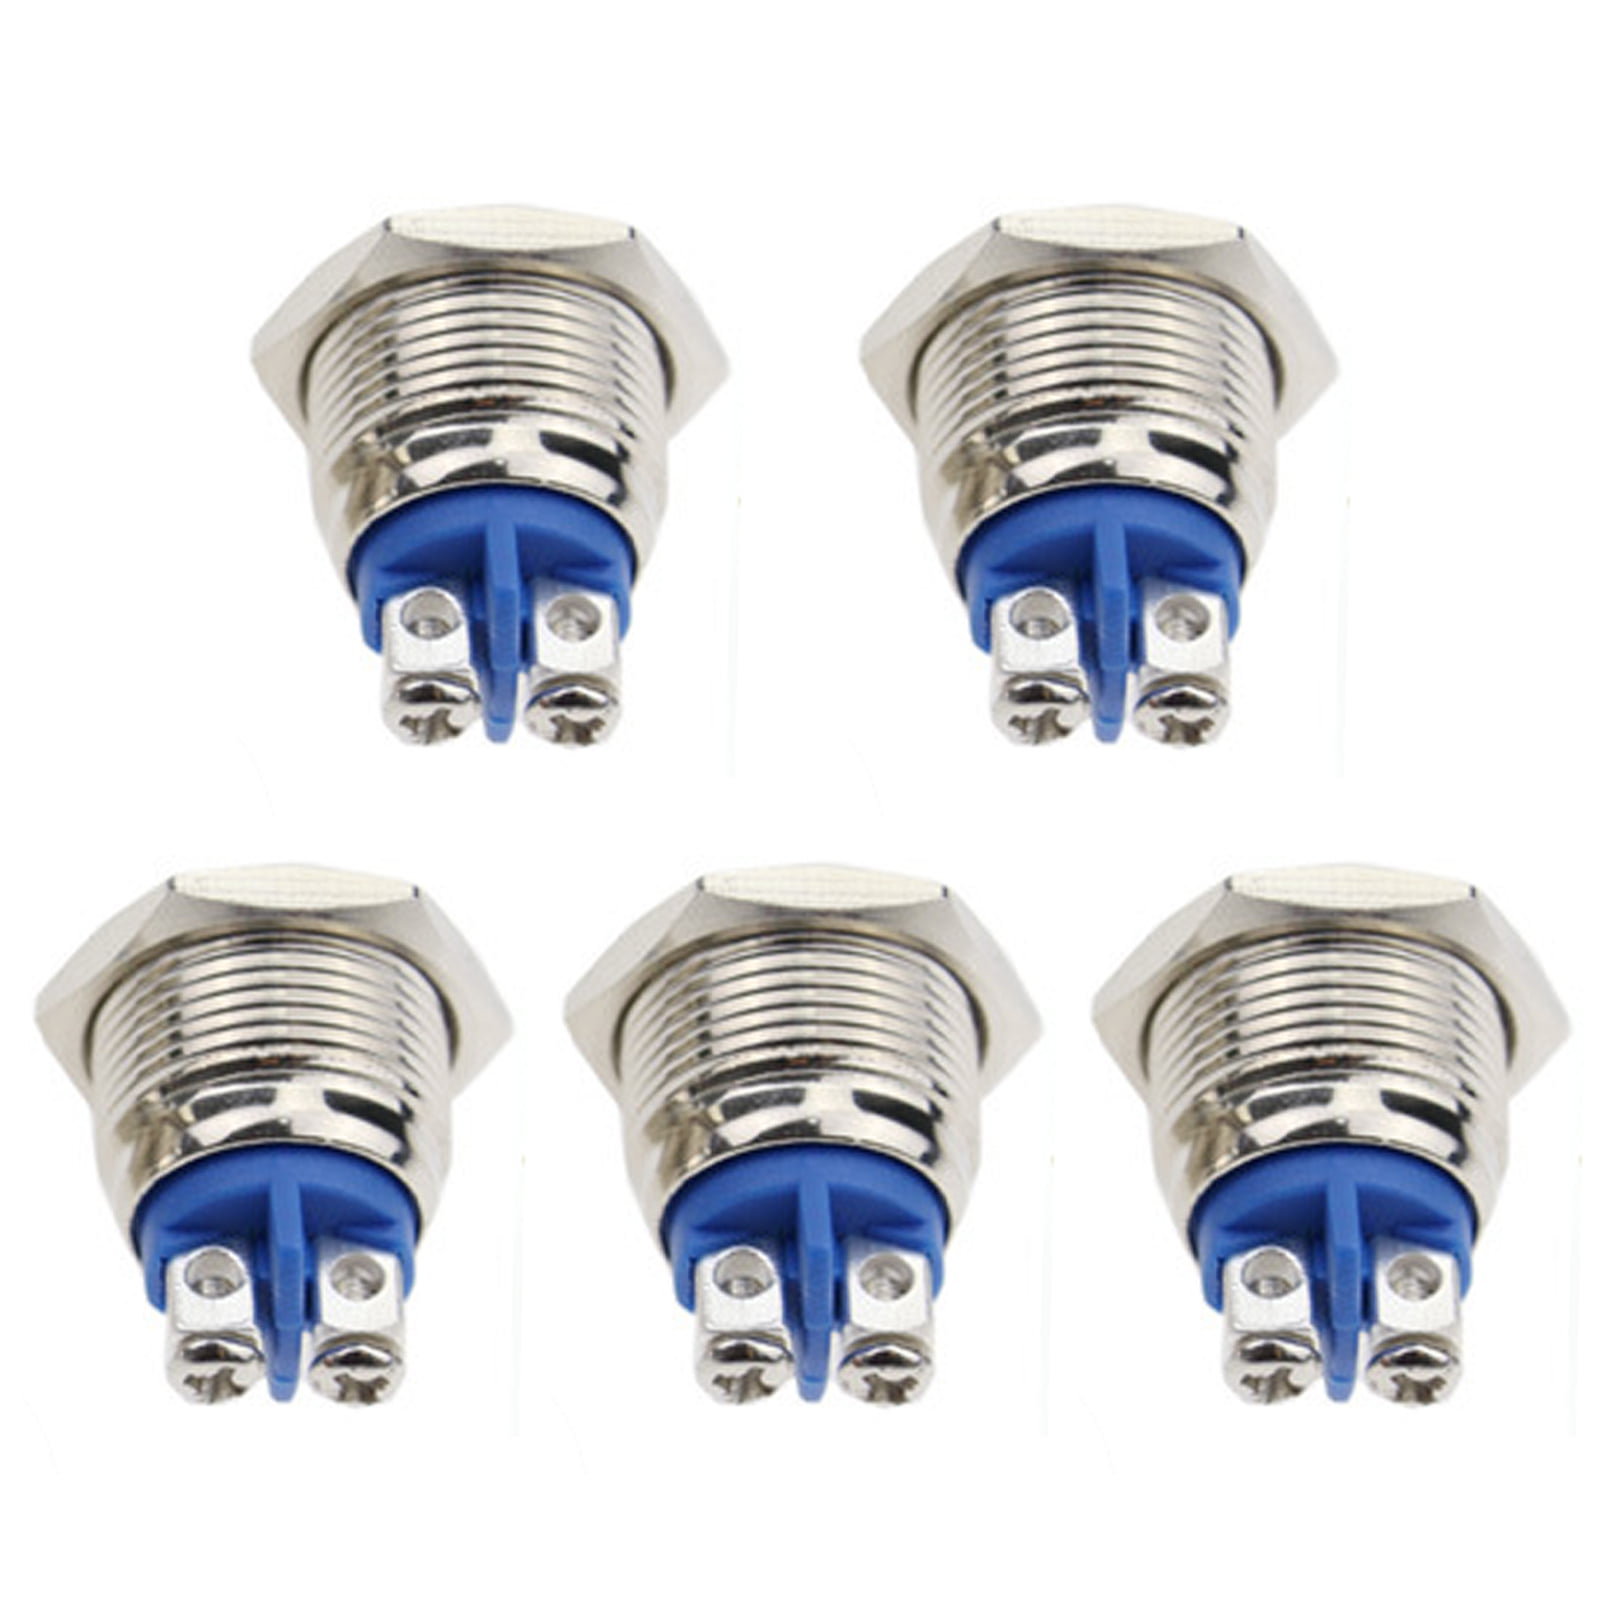 1pcs Car 16mm 5A Stainless Steel Screw Push Button Switch Momentary Switch Kit 